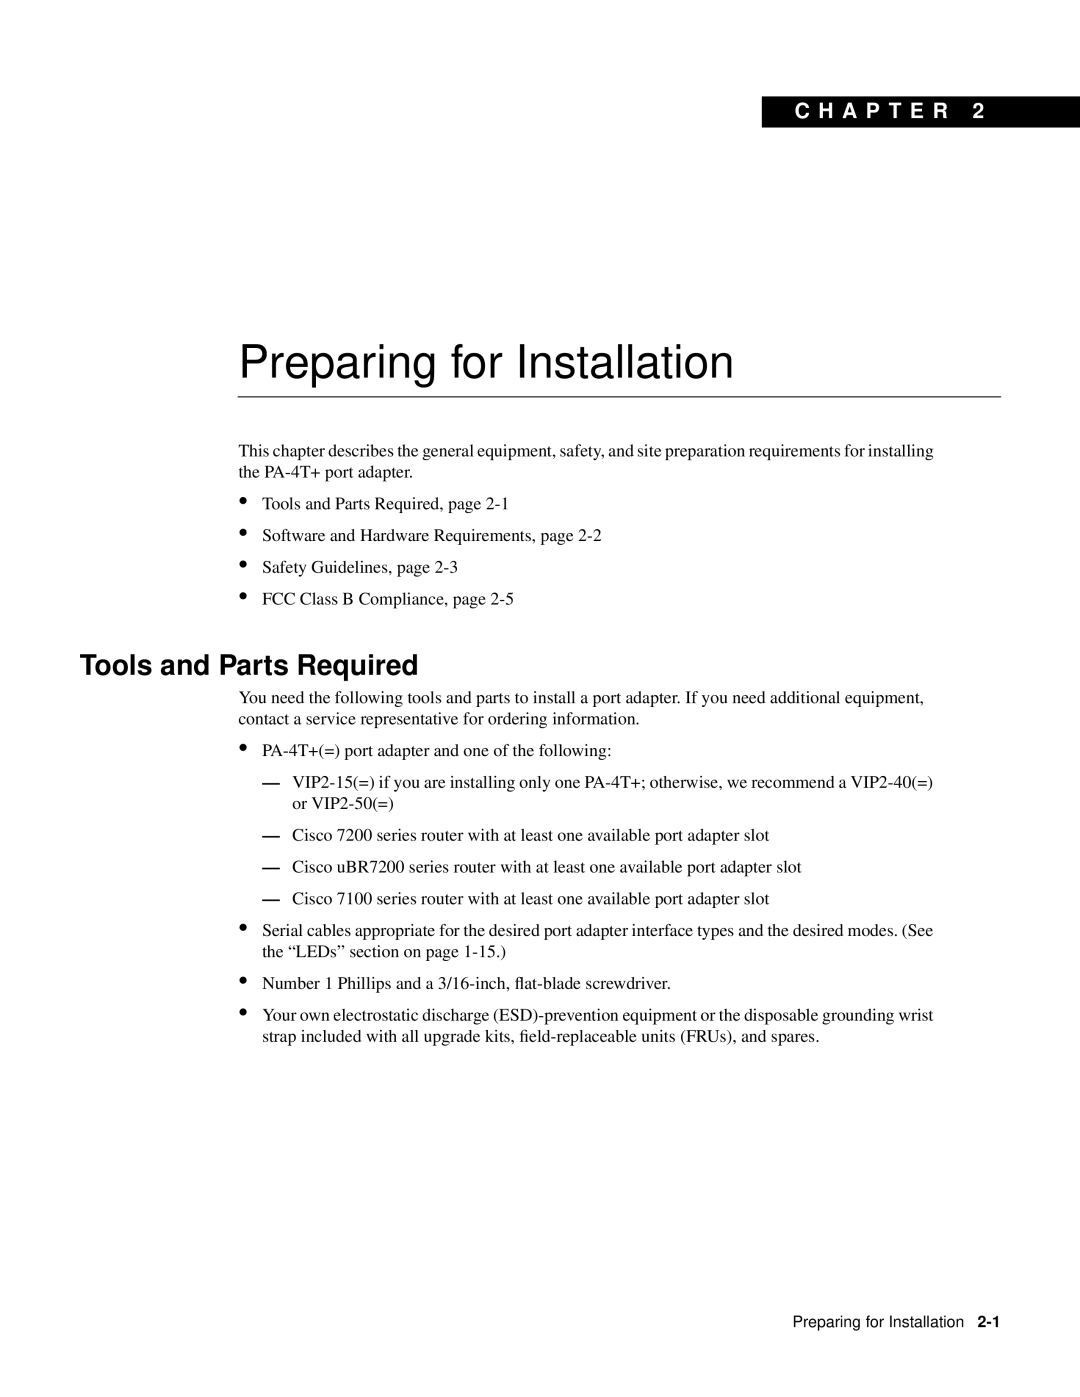 Cisco Systems PA-4T manual Preparing for Installation, Tools and Parts Required, C H A P T E R 